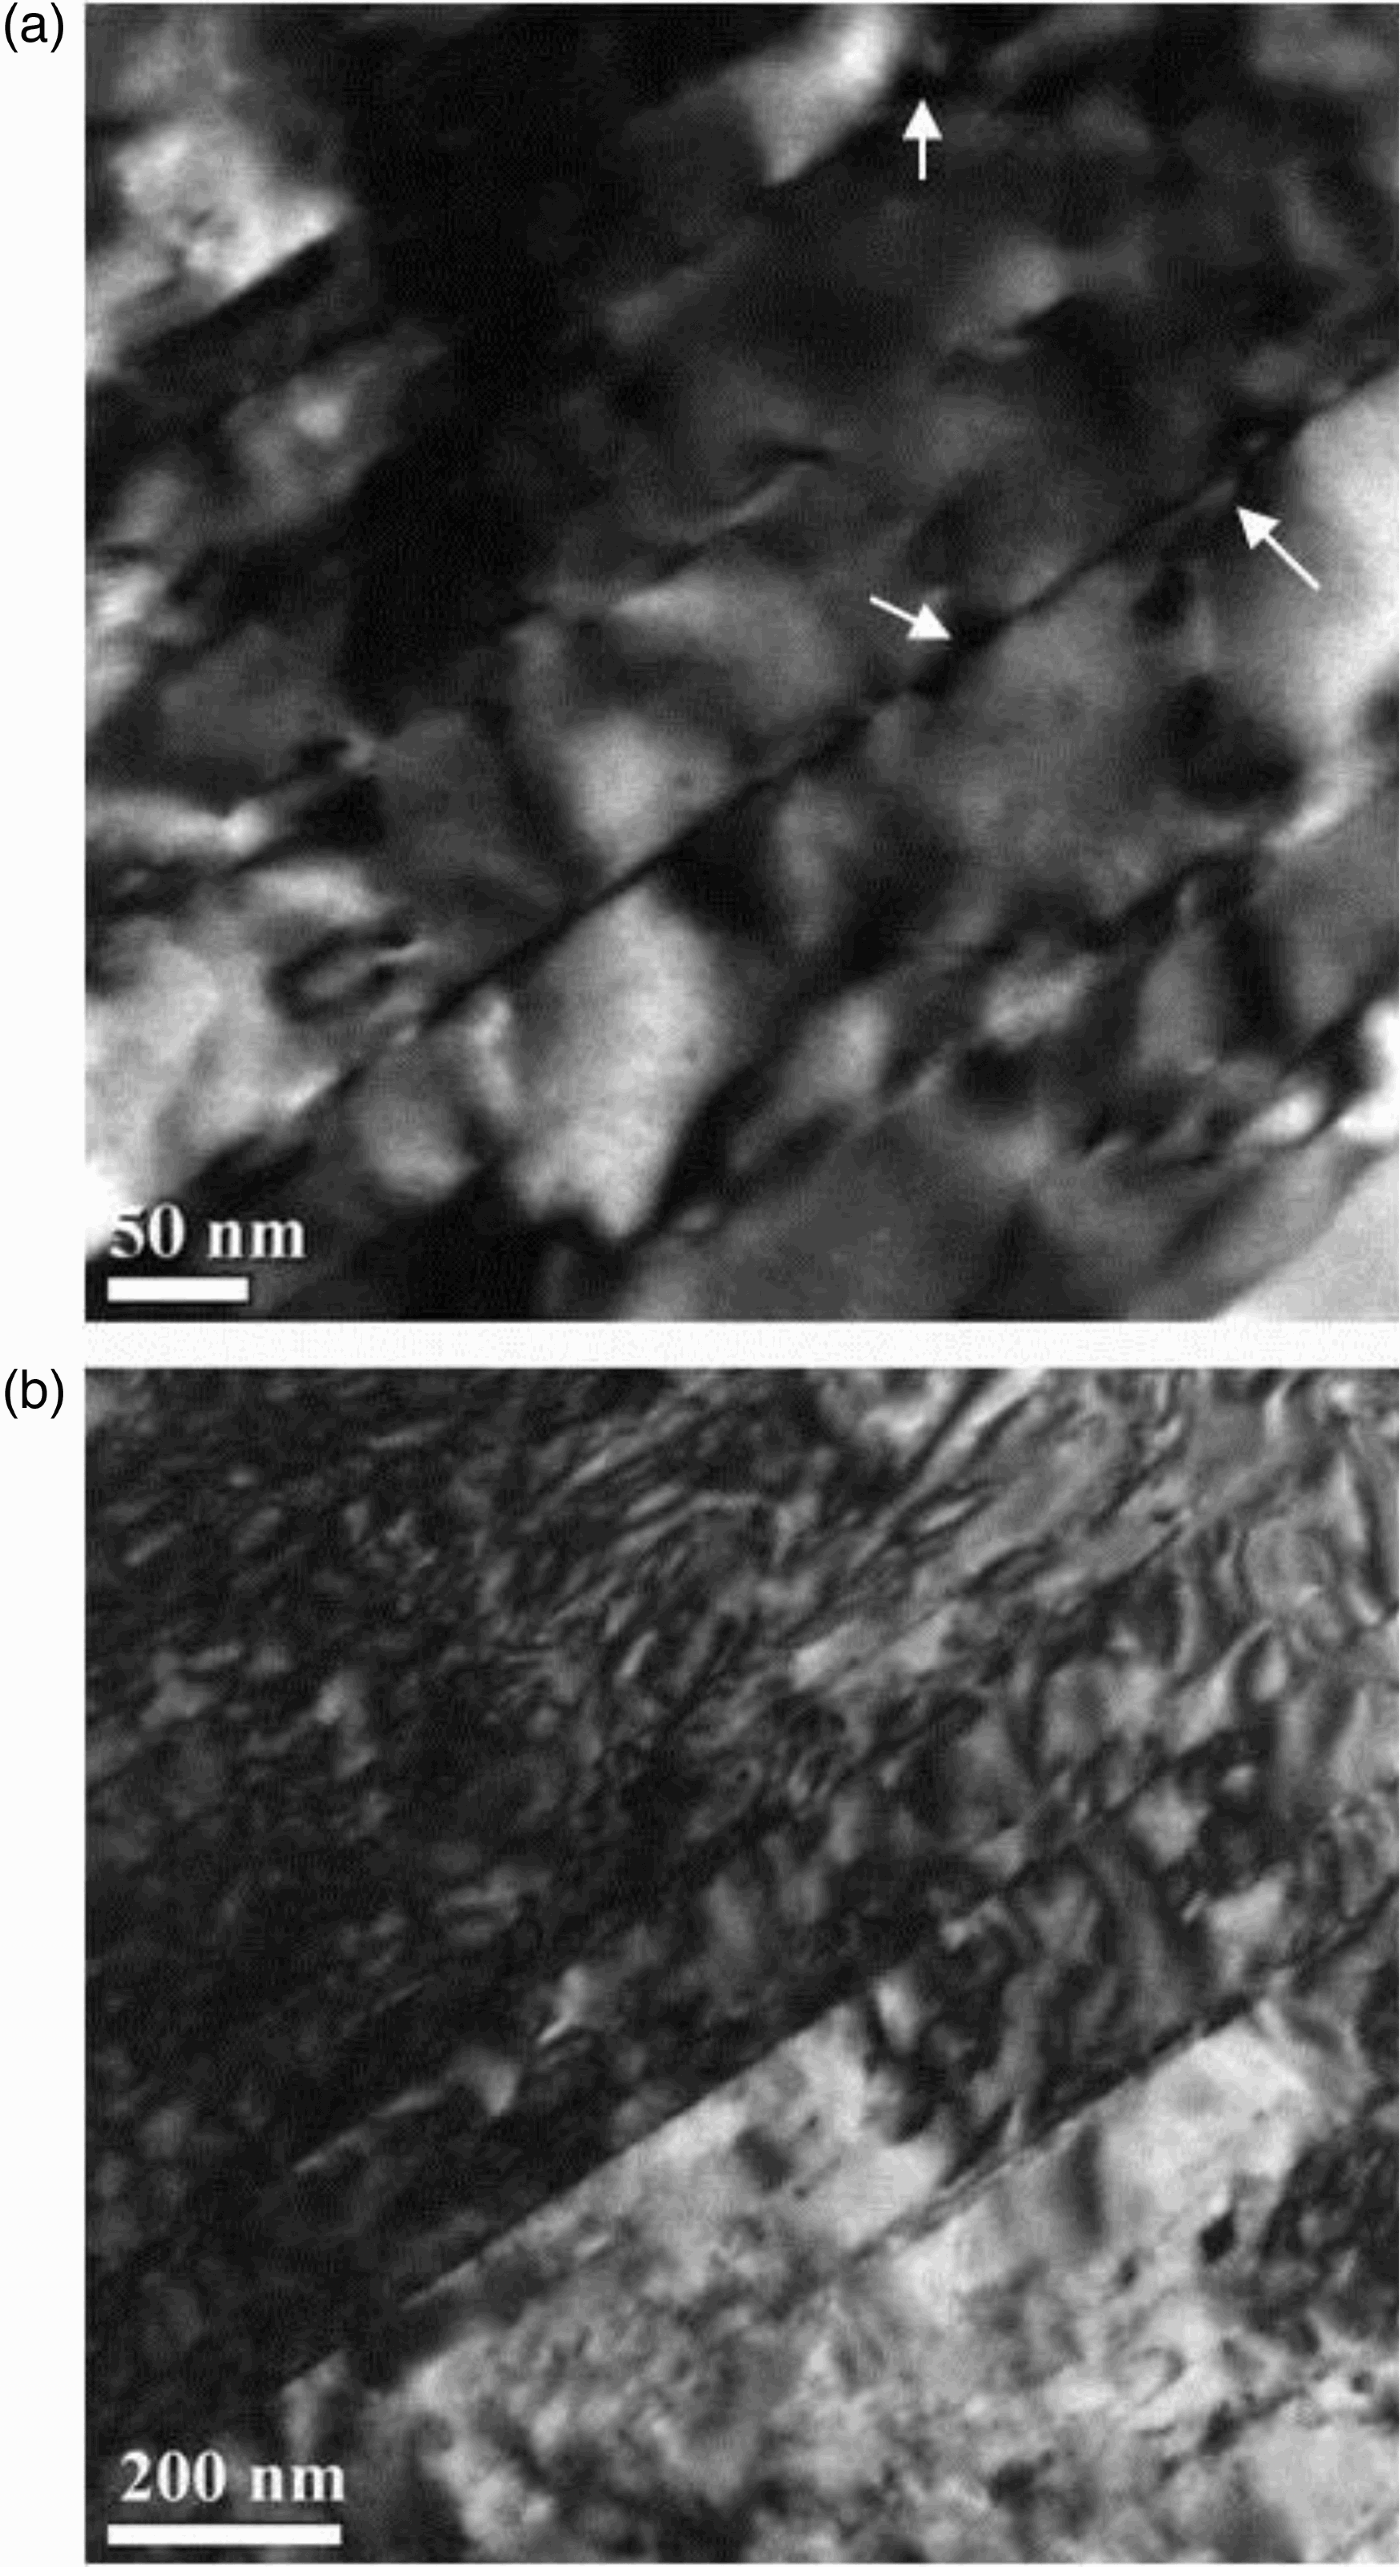 Figure 5. TEM images of 88% hot rolled sample after tensile test. (a) Fragments of SFs cut by the dislocations marked by white arrows (b) High density of dislocations was trapped between SFs.